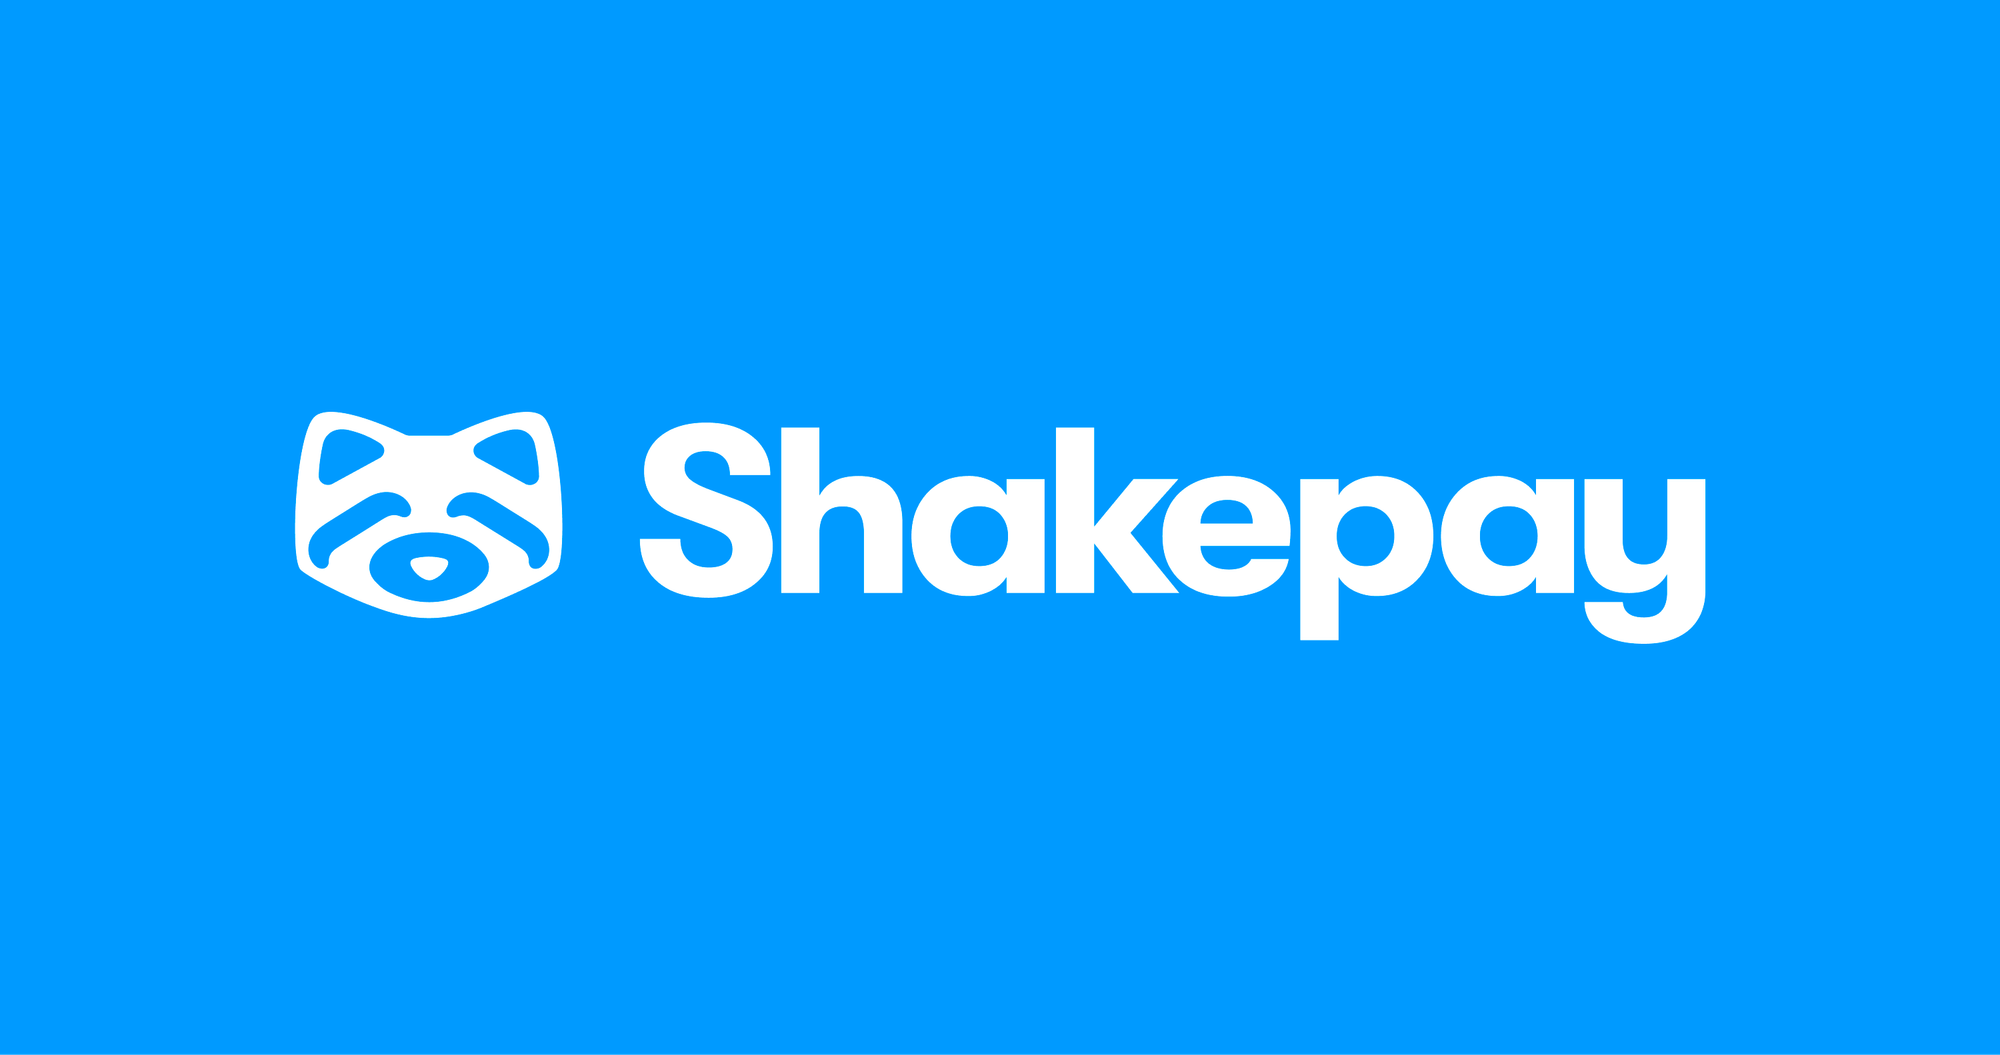 Shakepay Welcomes Eric Richmond as New General Counsel and Head of Business Development